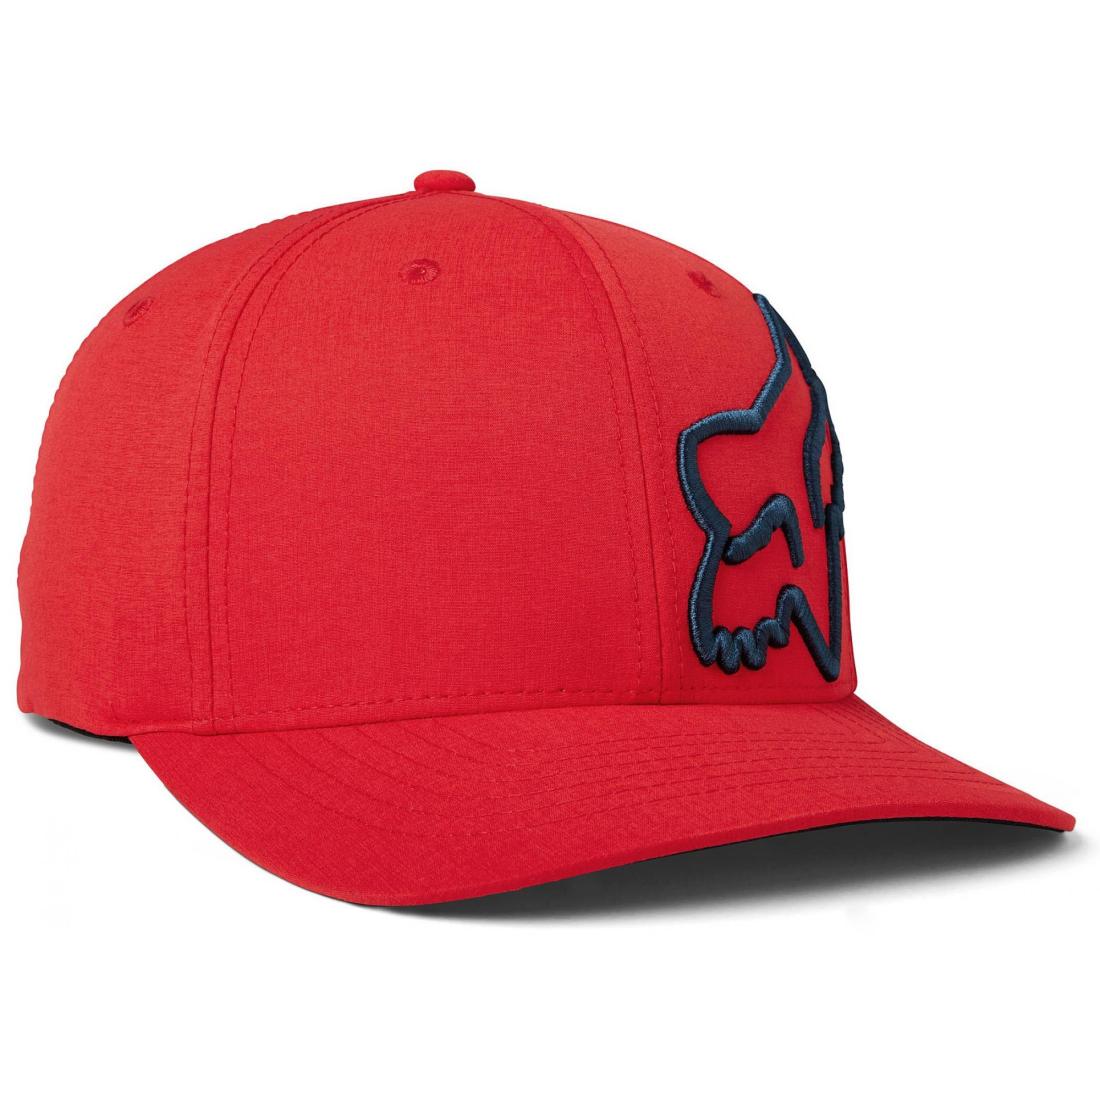 Clouded Flexfit 2.0 Hat Heather Red